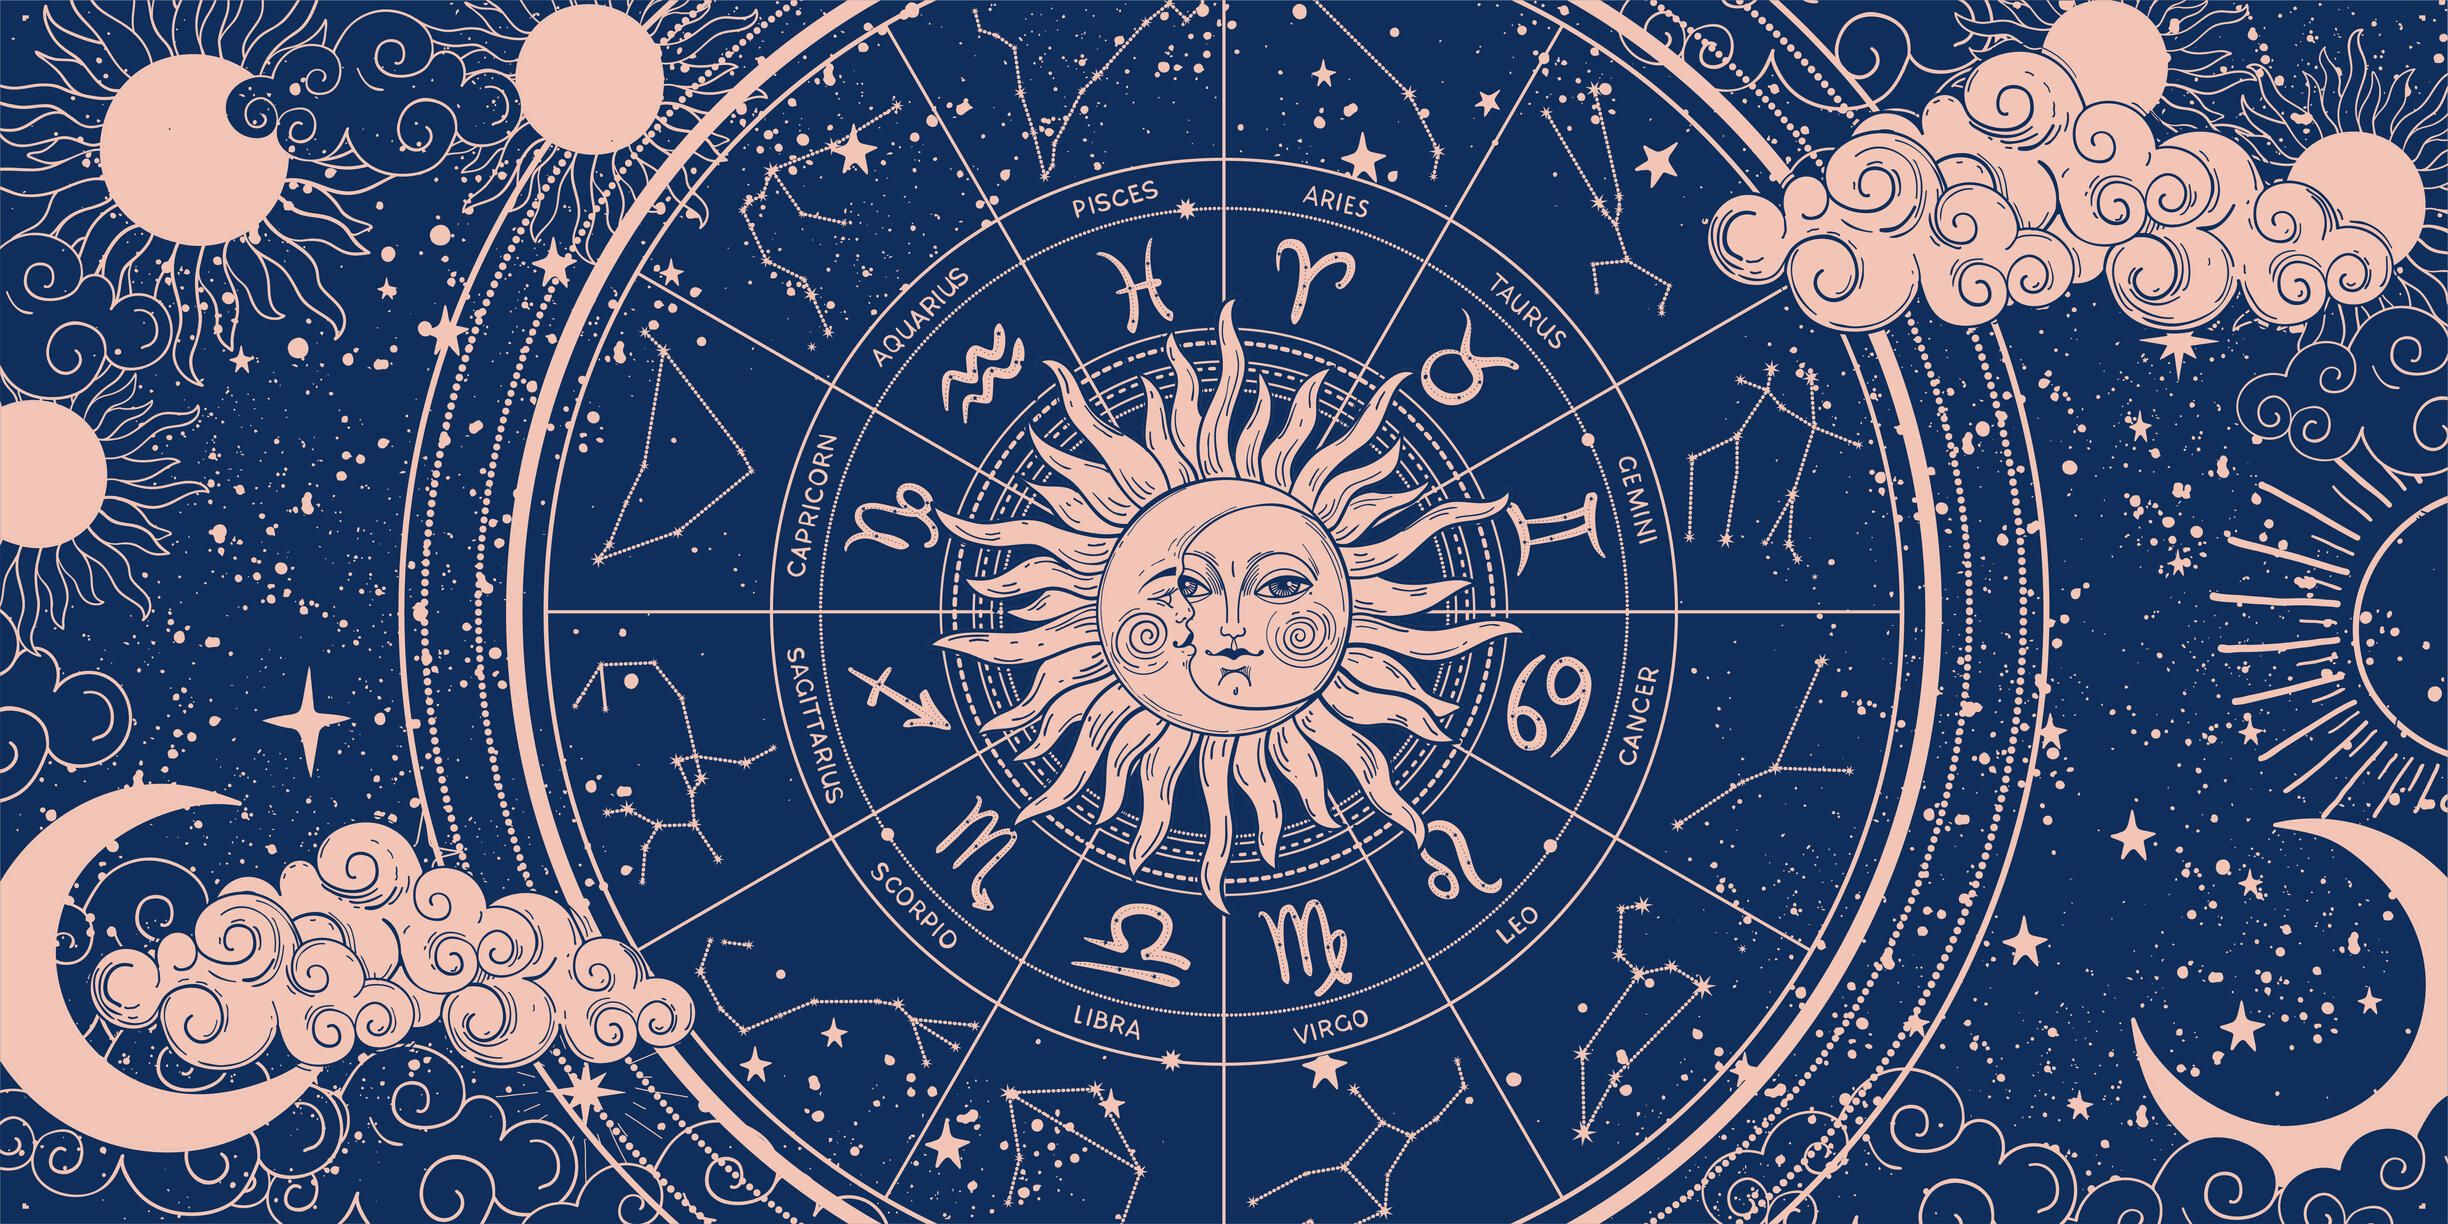 Your Daily Horoscope: Here's What's In Store For April 16th